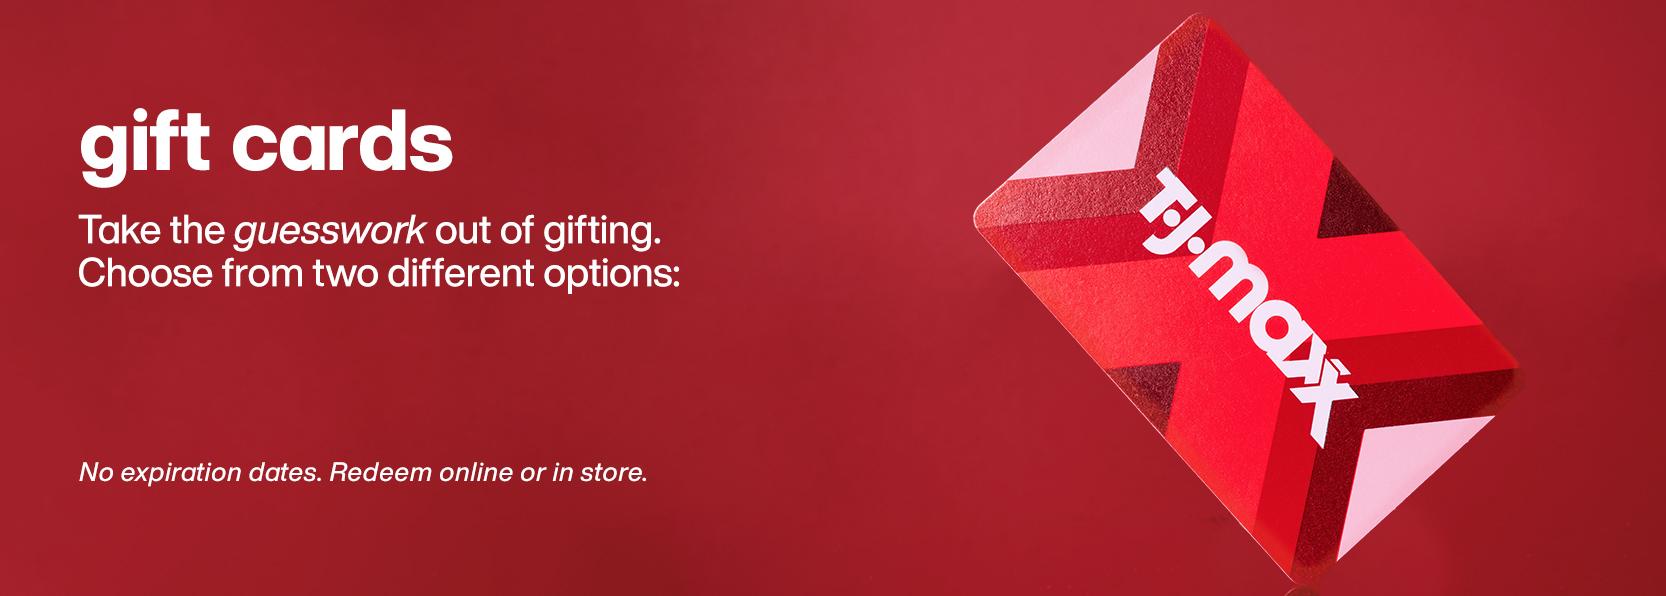 Gift cards, Take the guesswork out of gifting. Choose from two different options: *No expiration dates. Redeem online or in store.